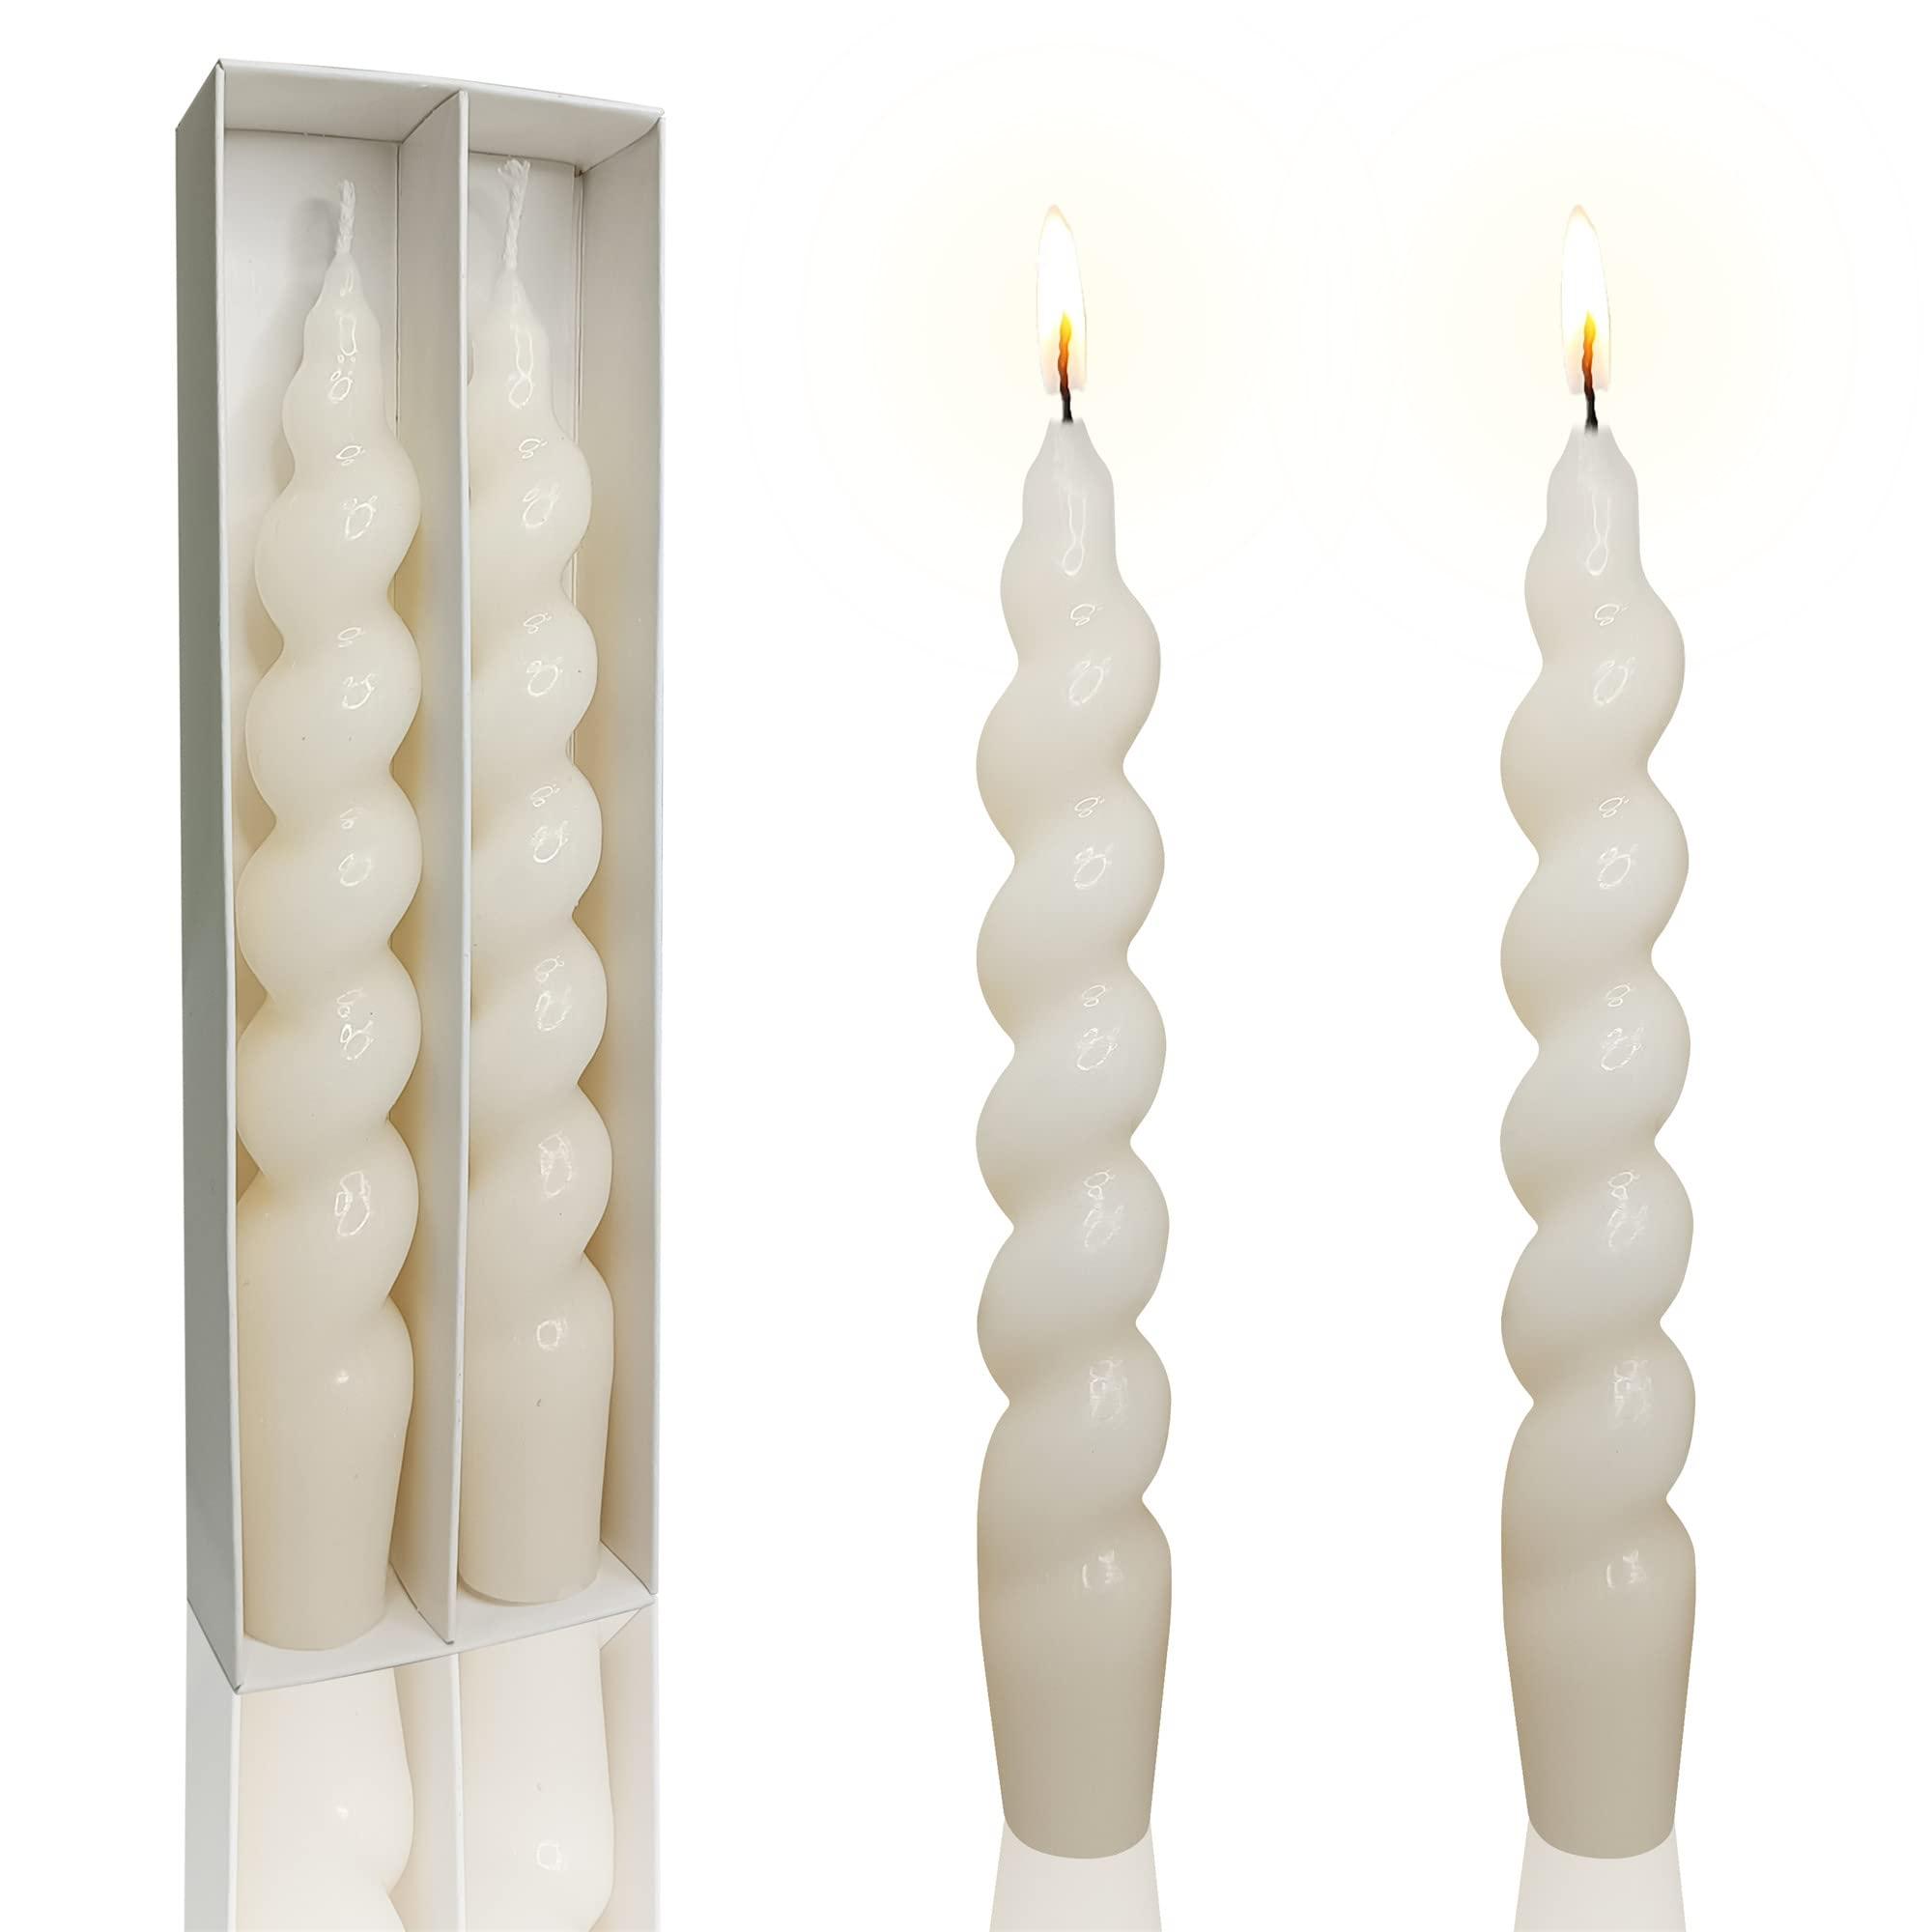 Gedengni 8inches Spiral Taper Candles Long Burning Twisted Tapered Candle - Metallic Green Color Decoration Dinner White Candlesticks Pack of 2 0